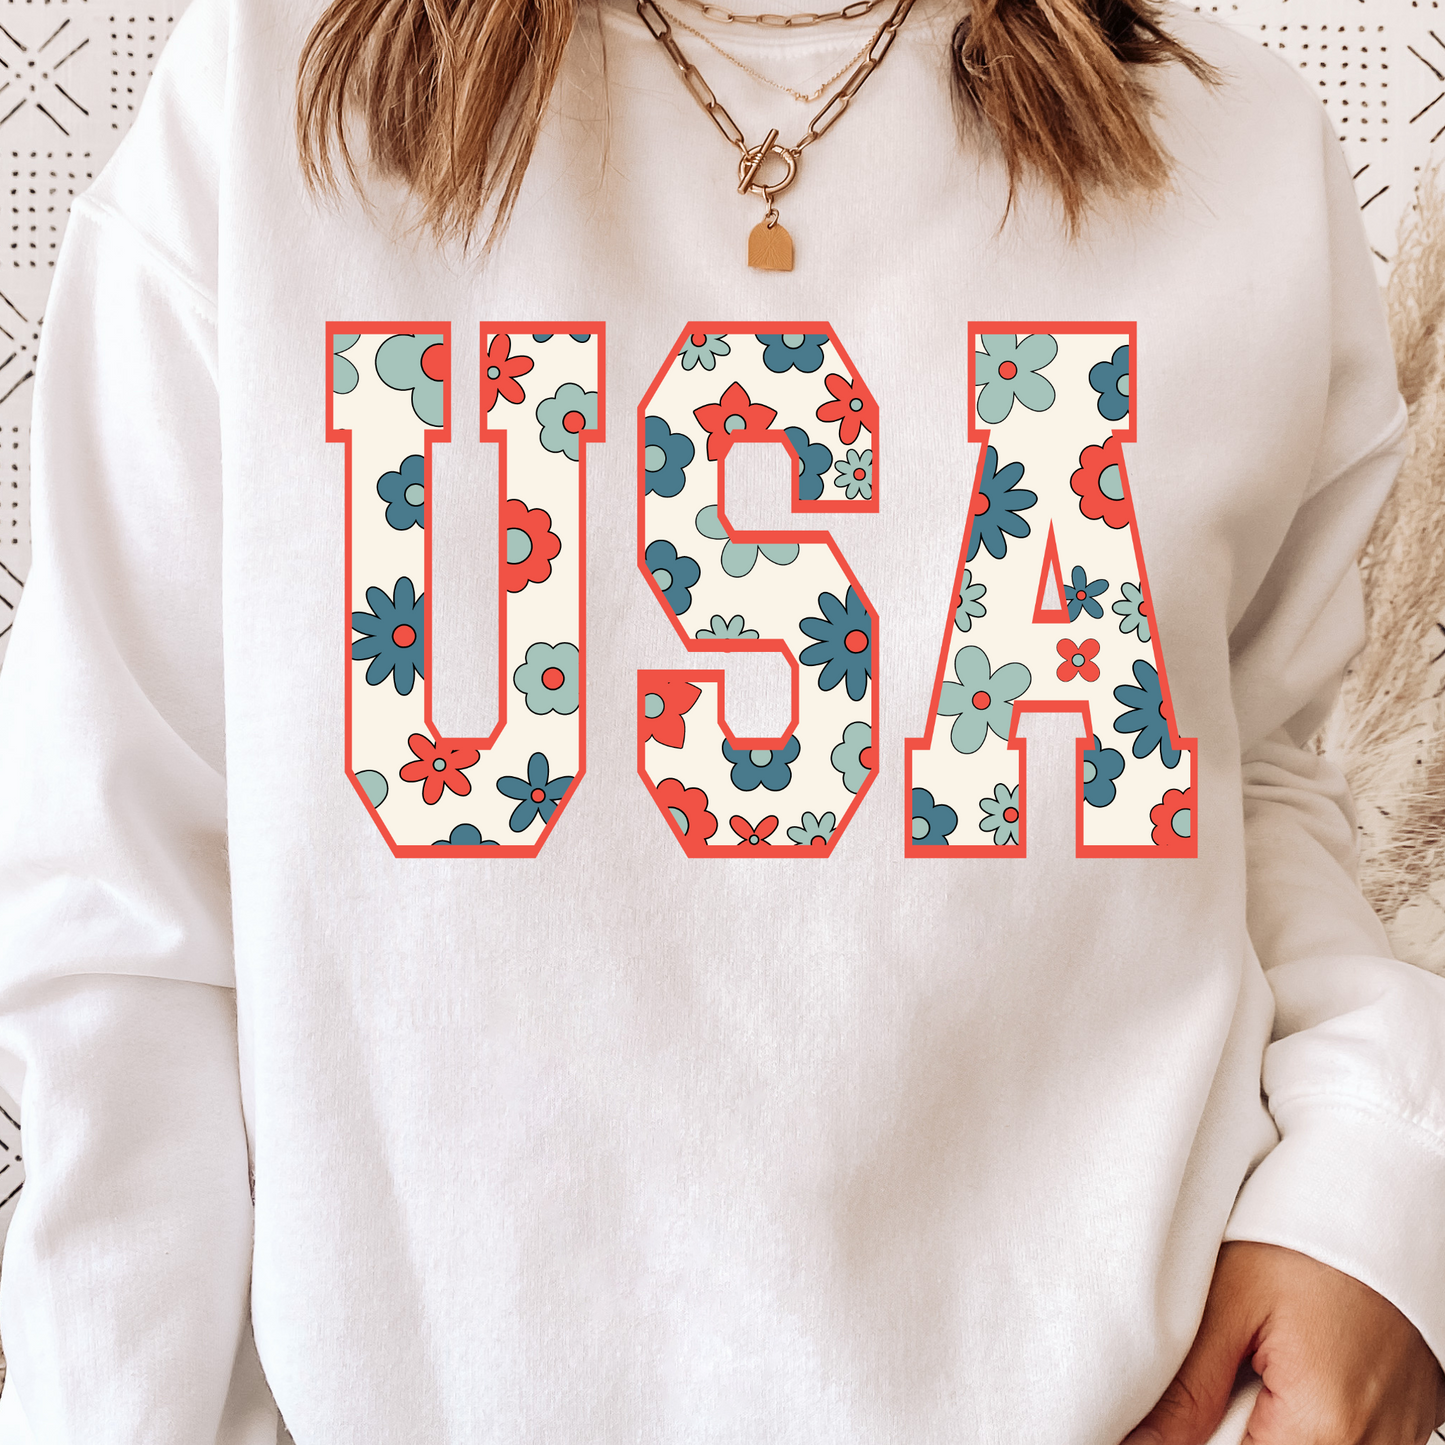 (shirt not included) USA groovy w flowers -  Clear Film Transfer